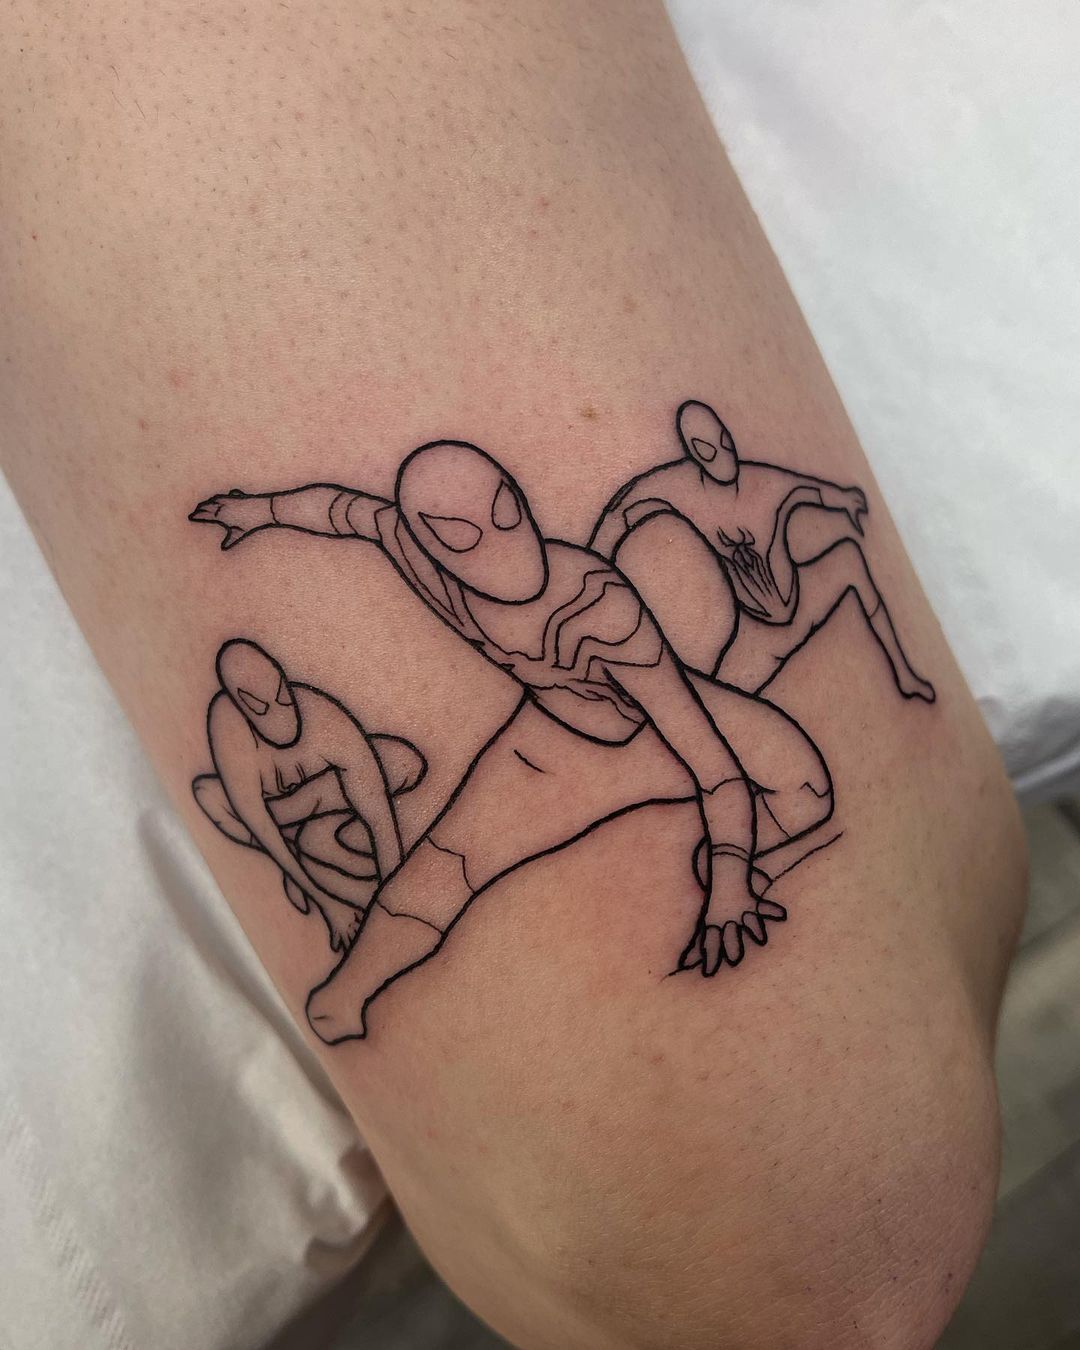 Peter Parker Semi-Permanent Tattoo. Lasts 1-2 weeks. Painless and easy to  apply. Organic ink. Browse more or create your own. | Inkbox™ |  Semi-Permanent Tattoos